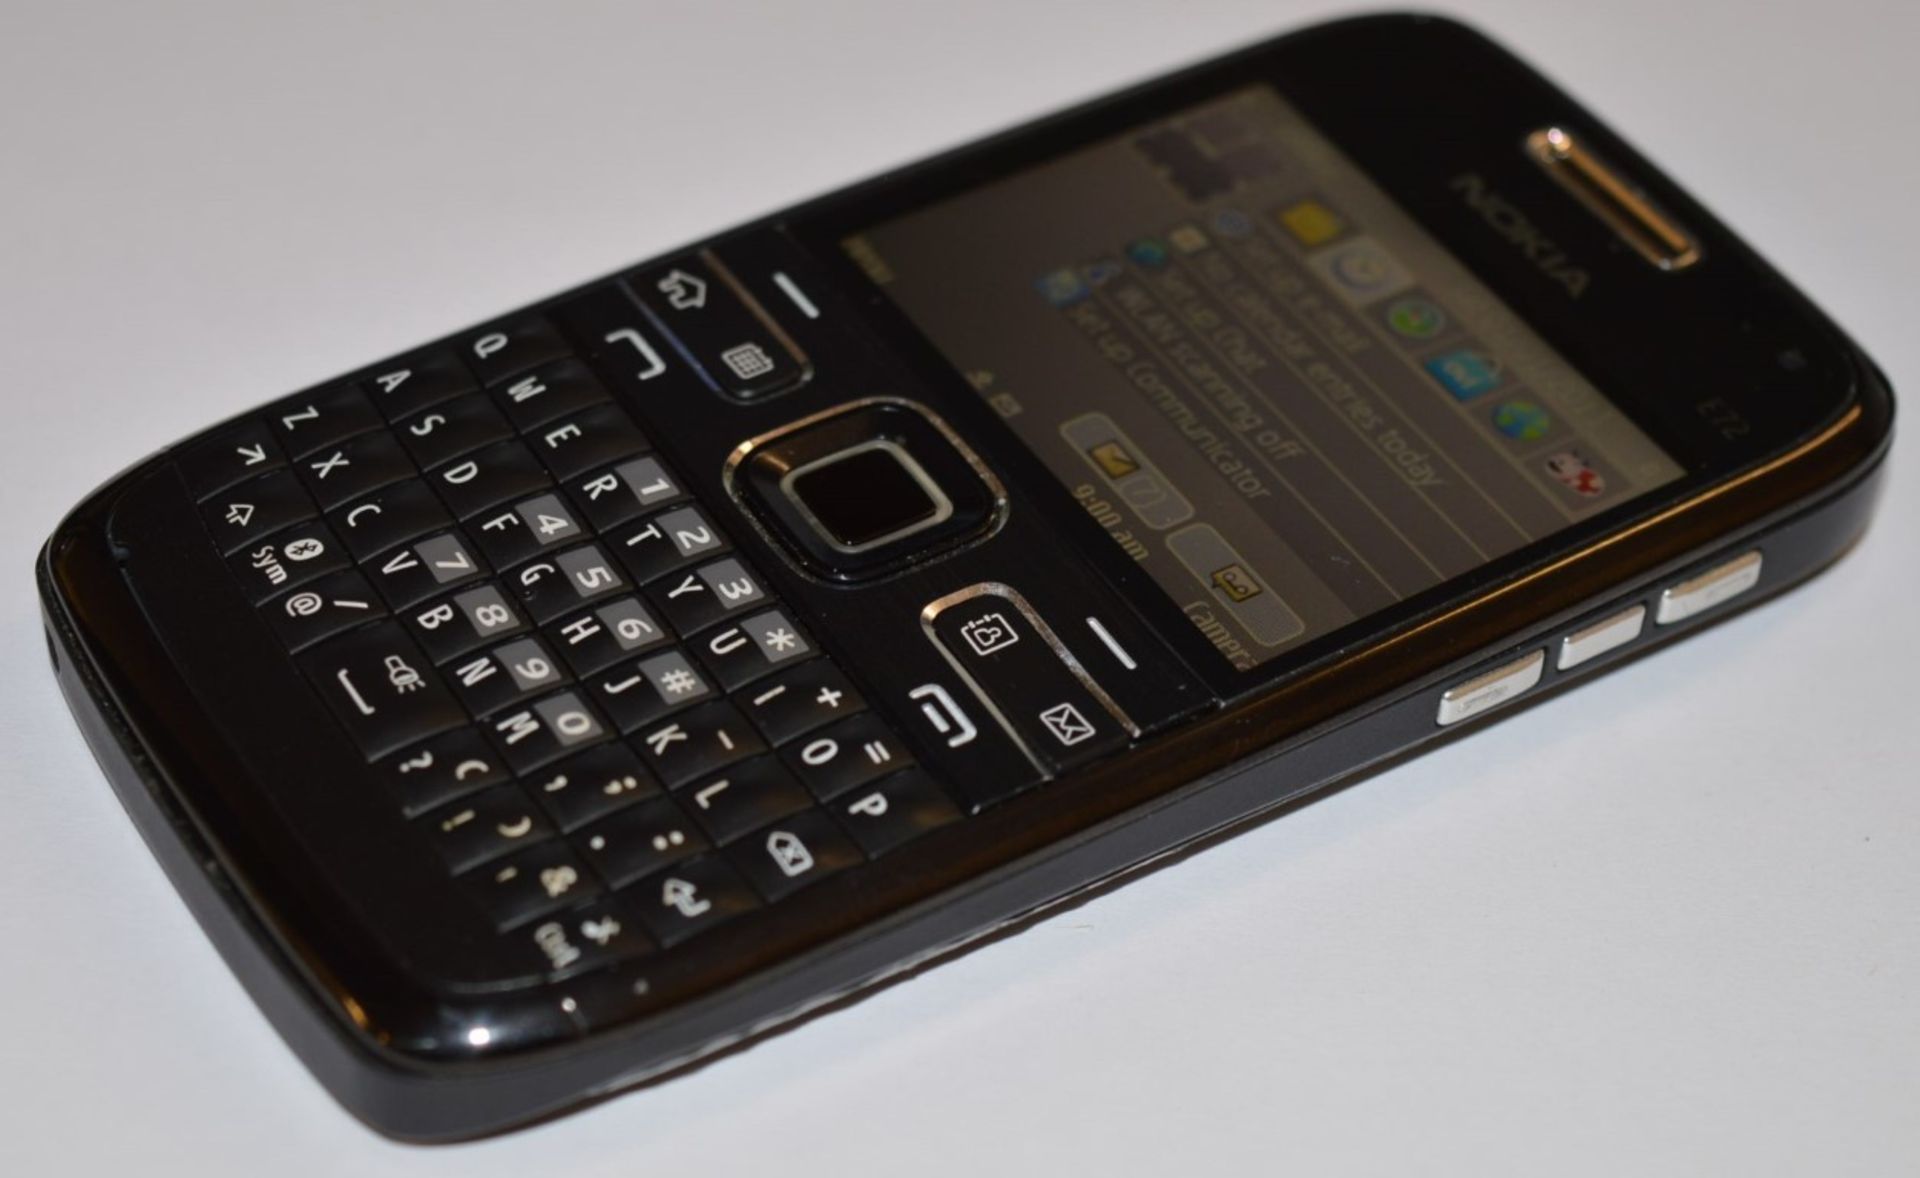 1 x Nokia E72 Mobile Phone Handset With Charger - Features Qwerty Keyboard, 600mhz CPU, 250mb - Image 4 of 6